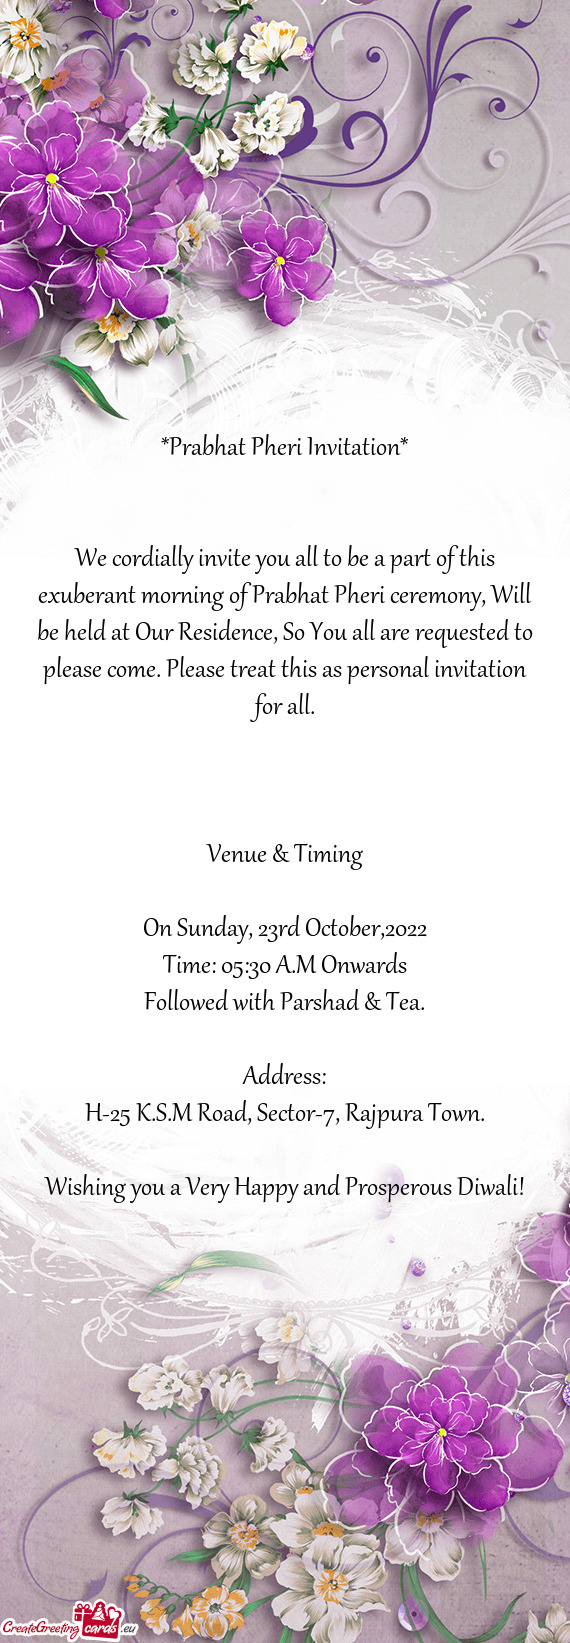 E held at Our Residence, So You all are requested to please come. Please treat this as personal invi